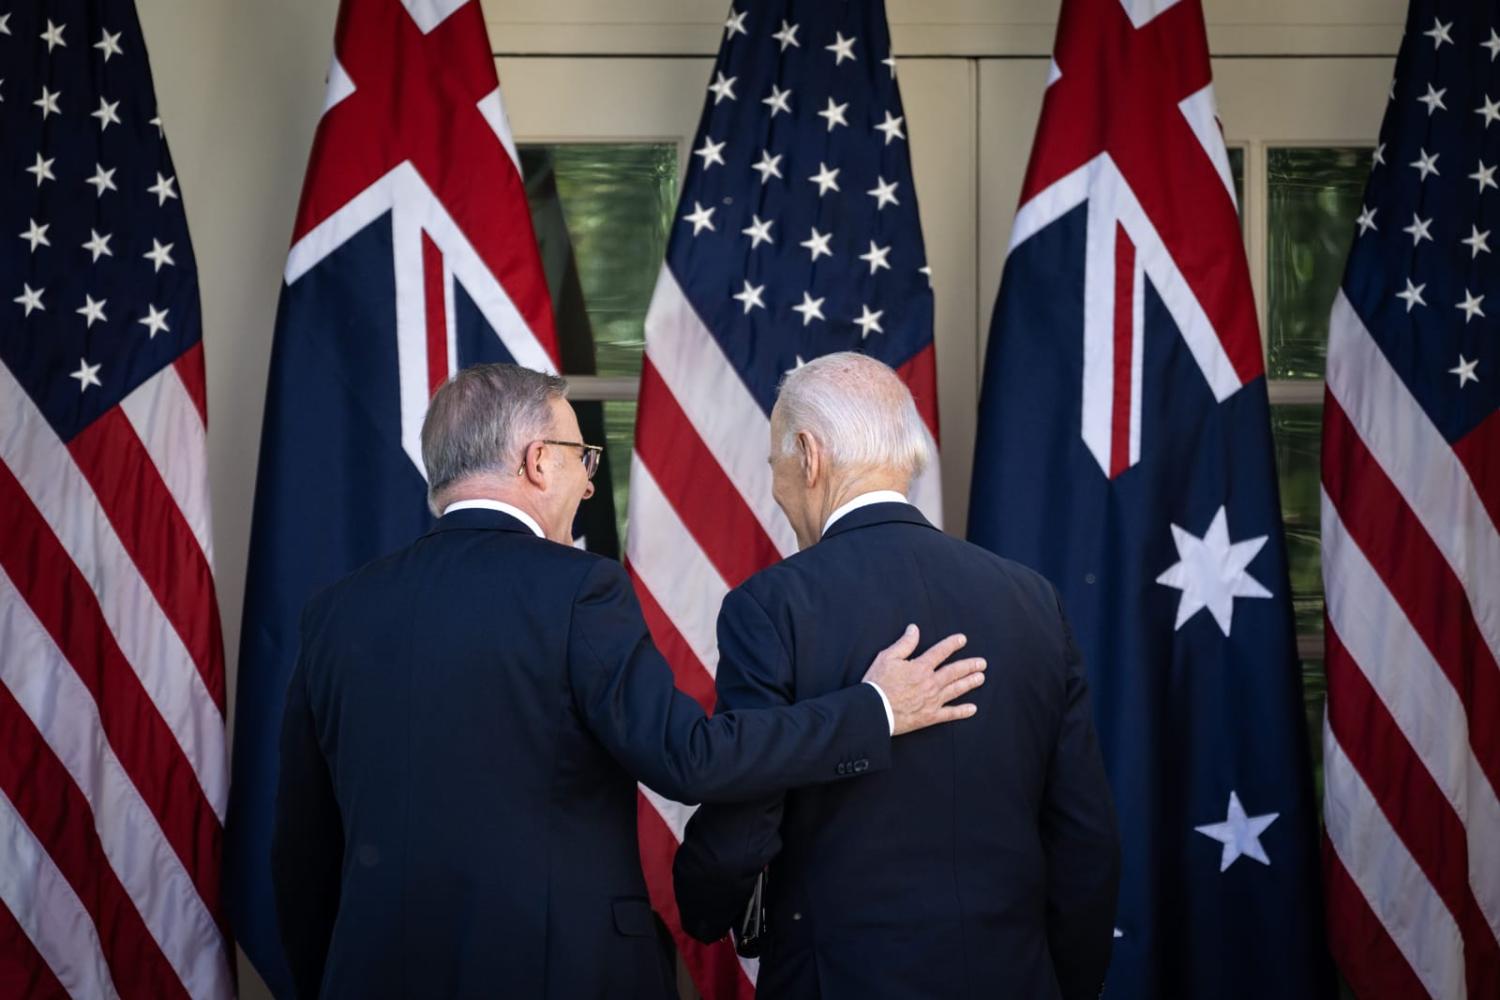 Reliability lends itself to greater levels of interpersonal trust between American and Australian leaders, yet there is room for Australia to be visible beyond a generic junior partner and stalwart ally (Drew Angerer/Getty Images)